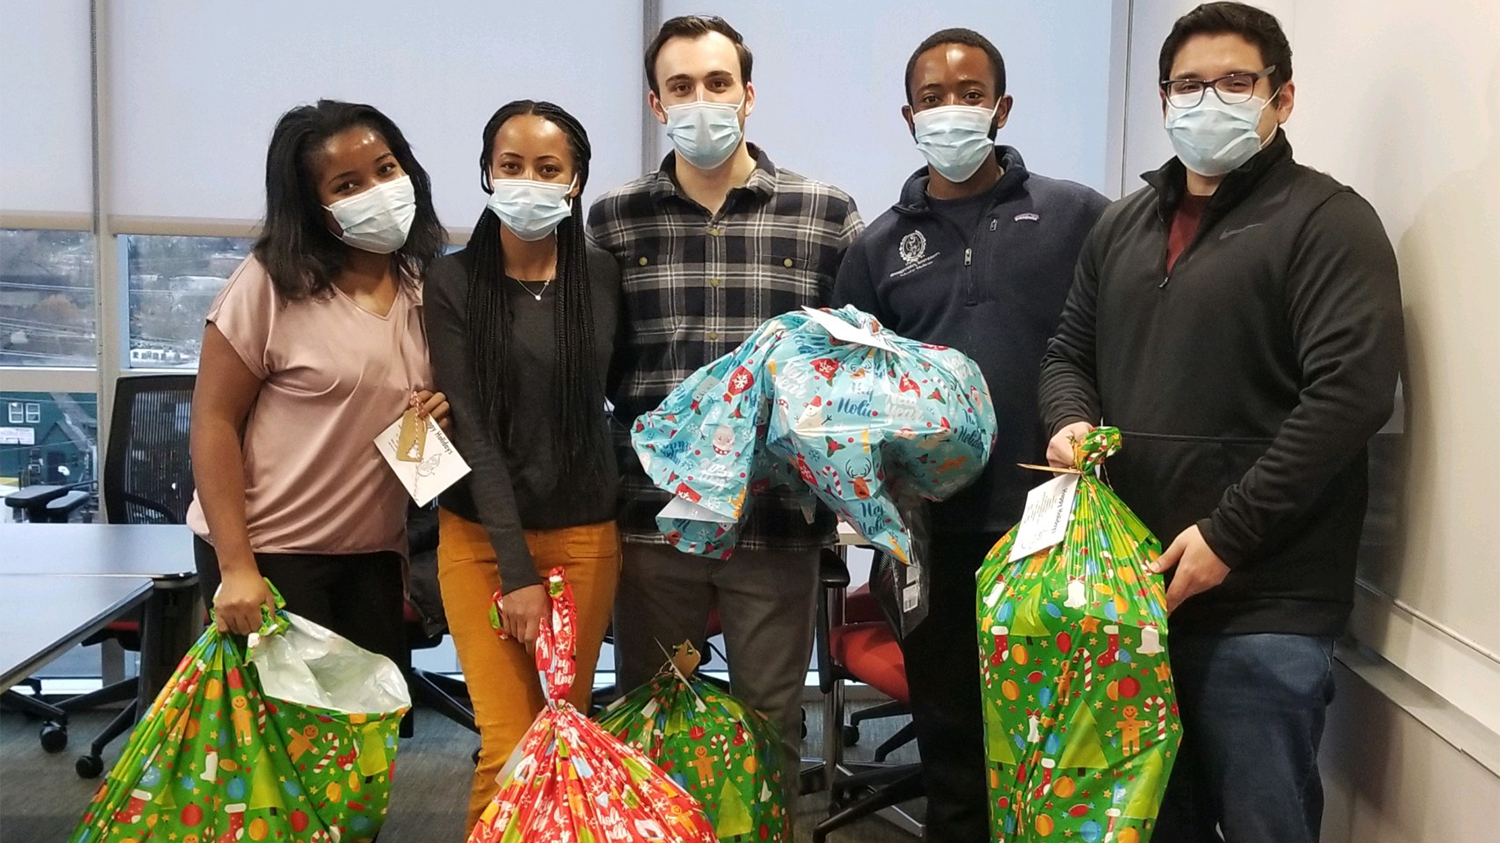 Five students stand together holding large, festive holiday bags filled with gifts